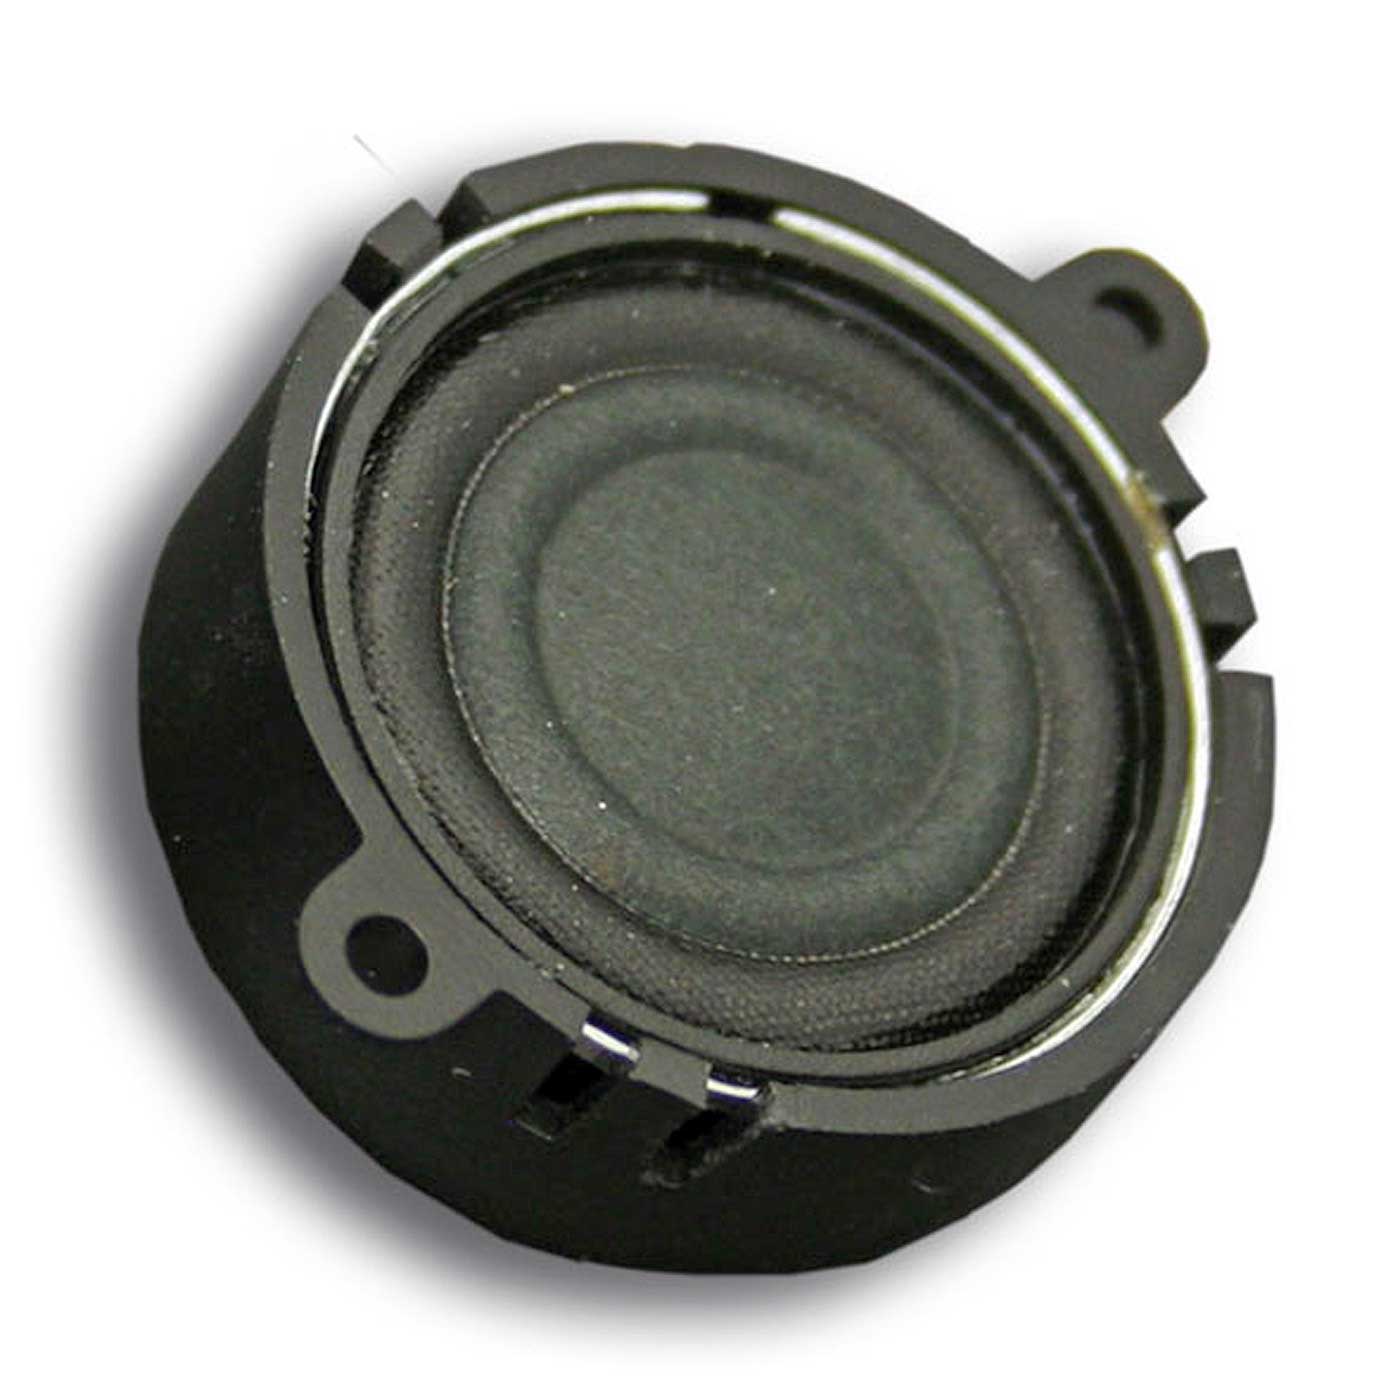 50332 Loudspeaker 23mm round, 4 Ohms with Sound Chamber